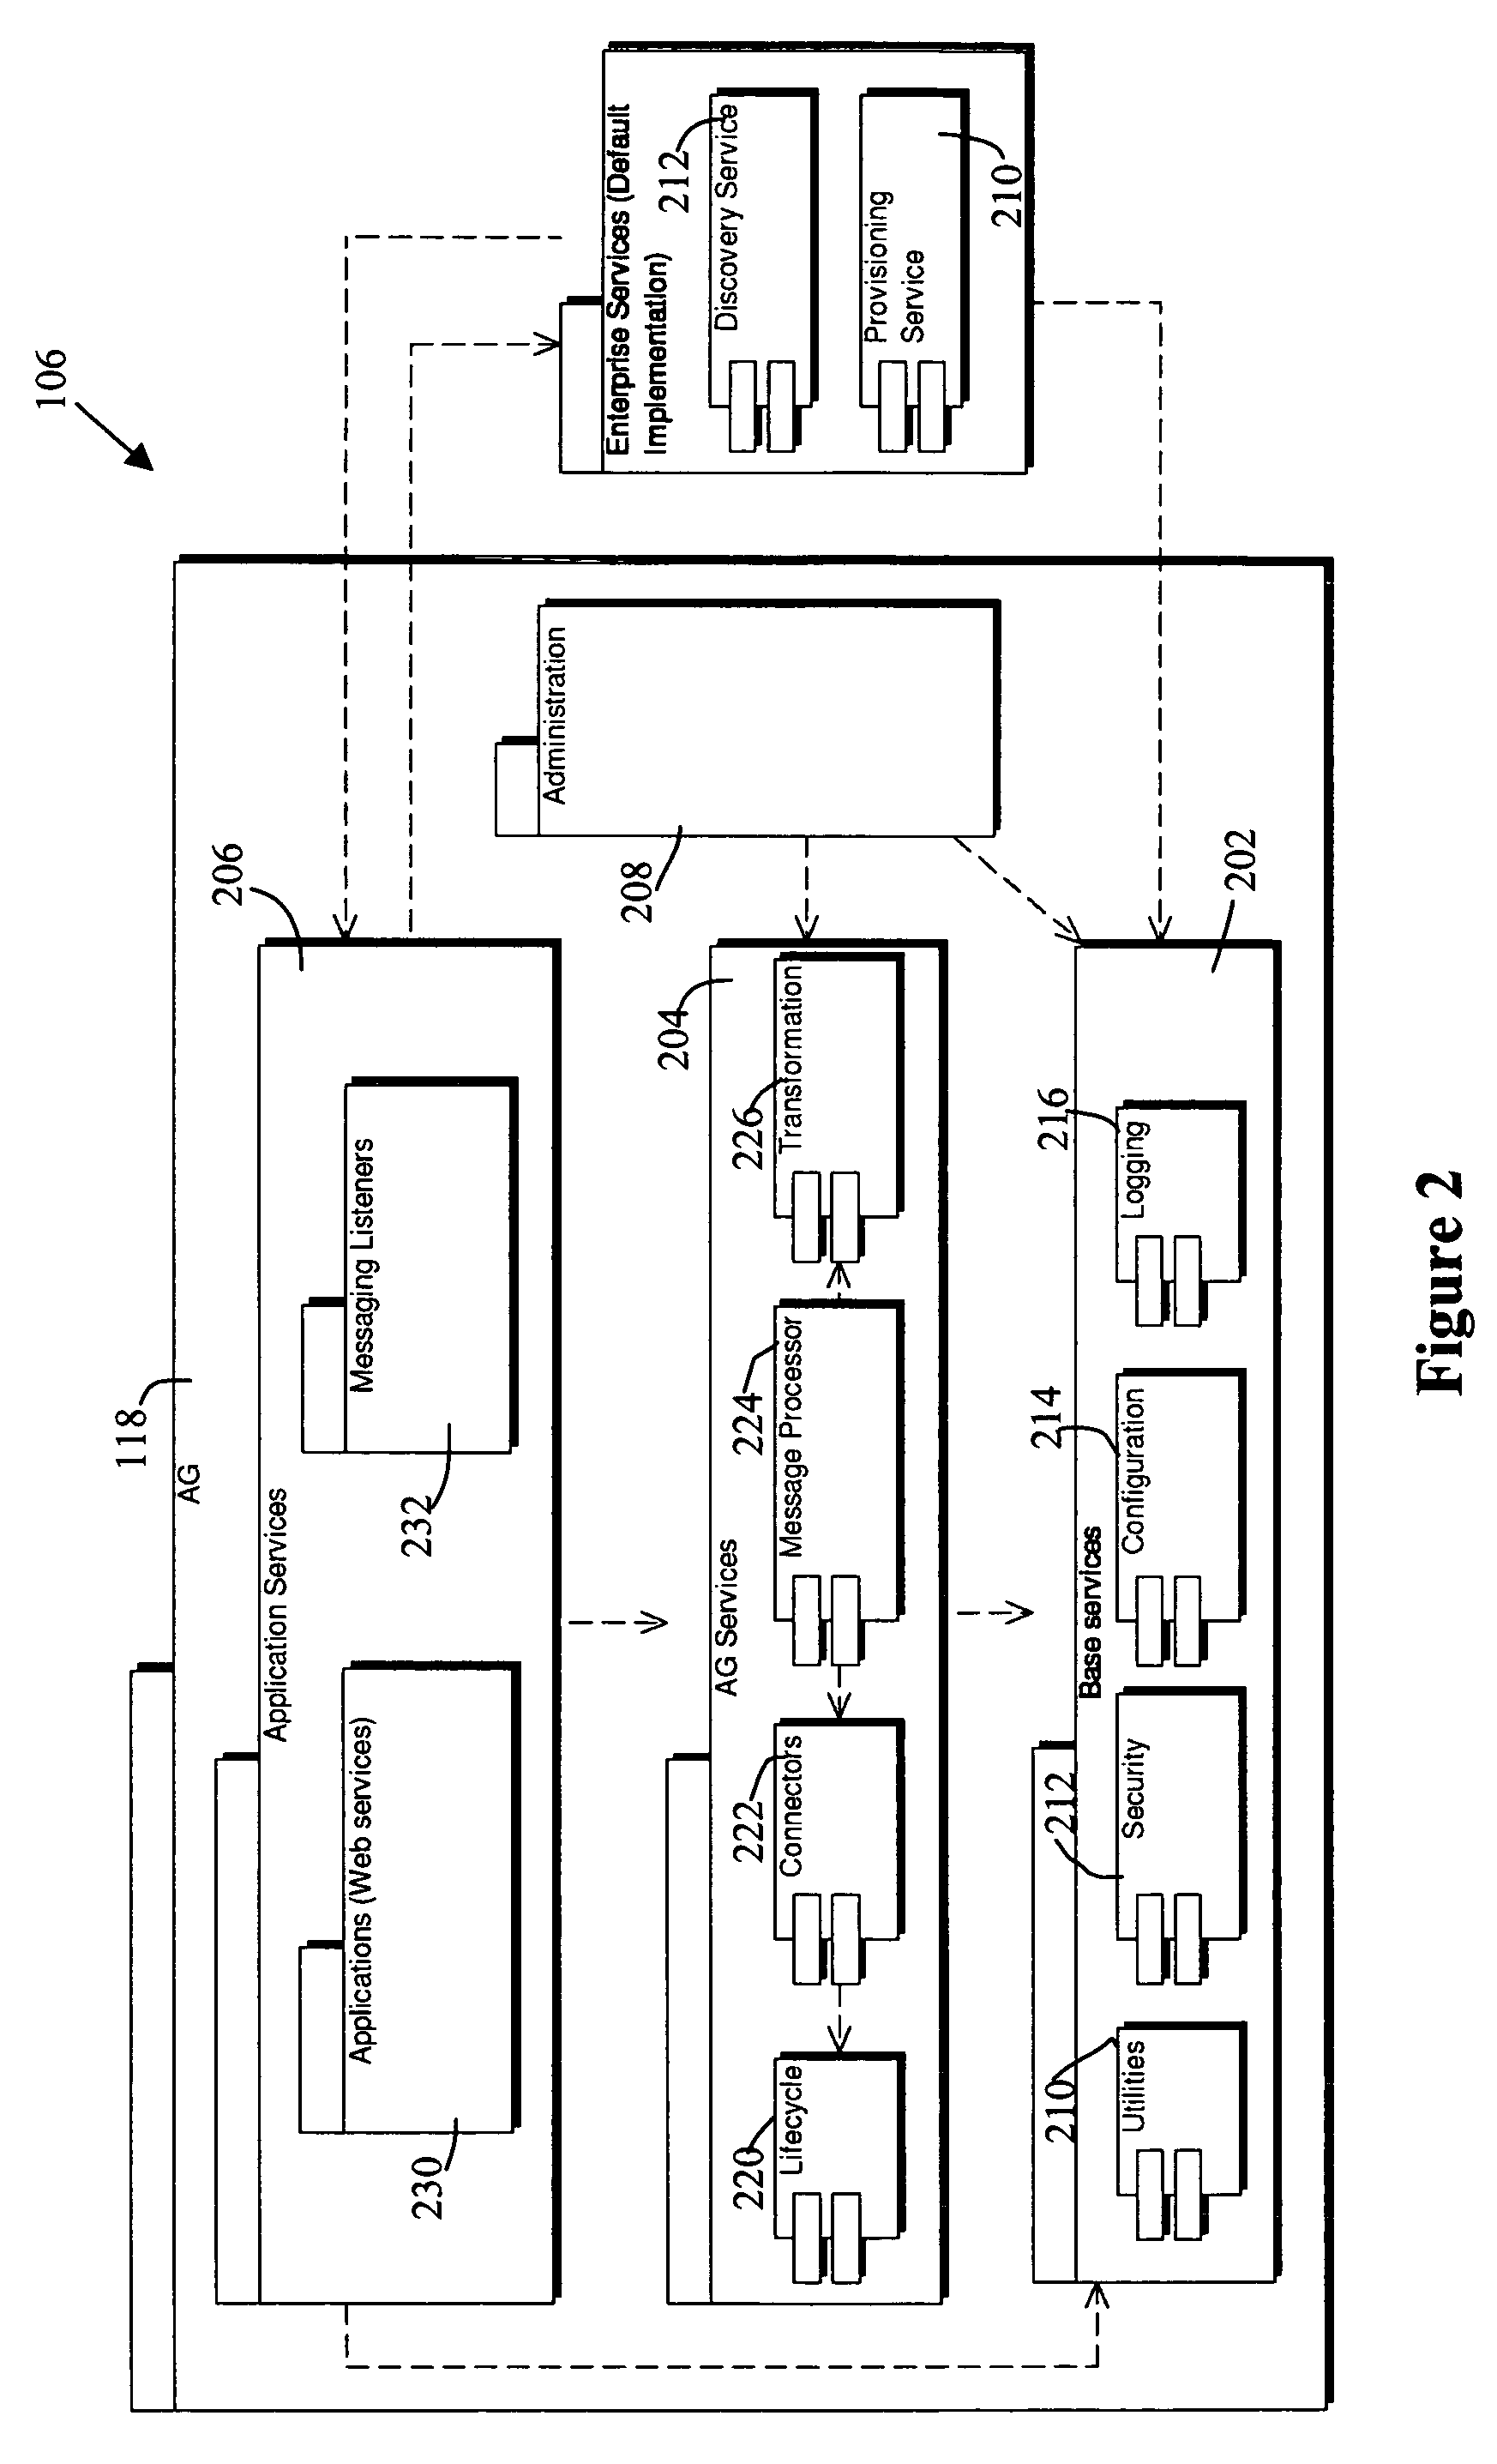 System and method for secure messaging between wireless device and application gateway